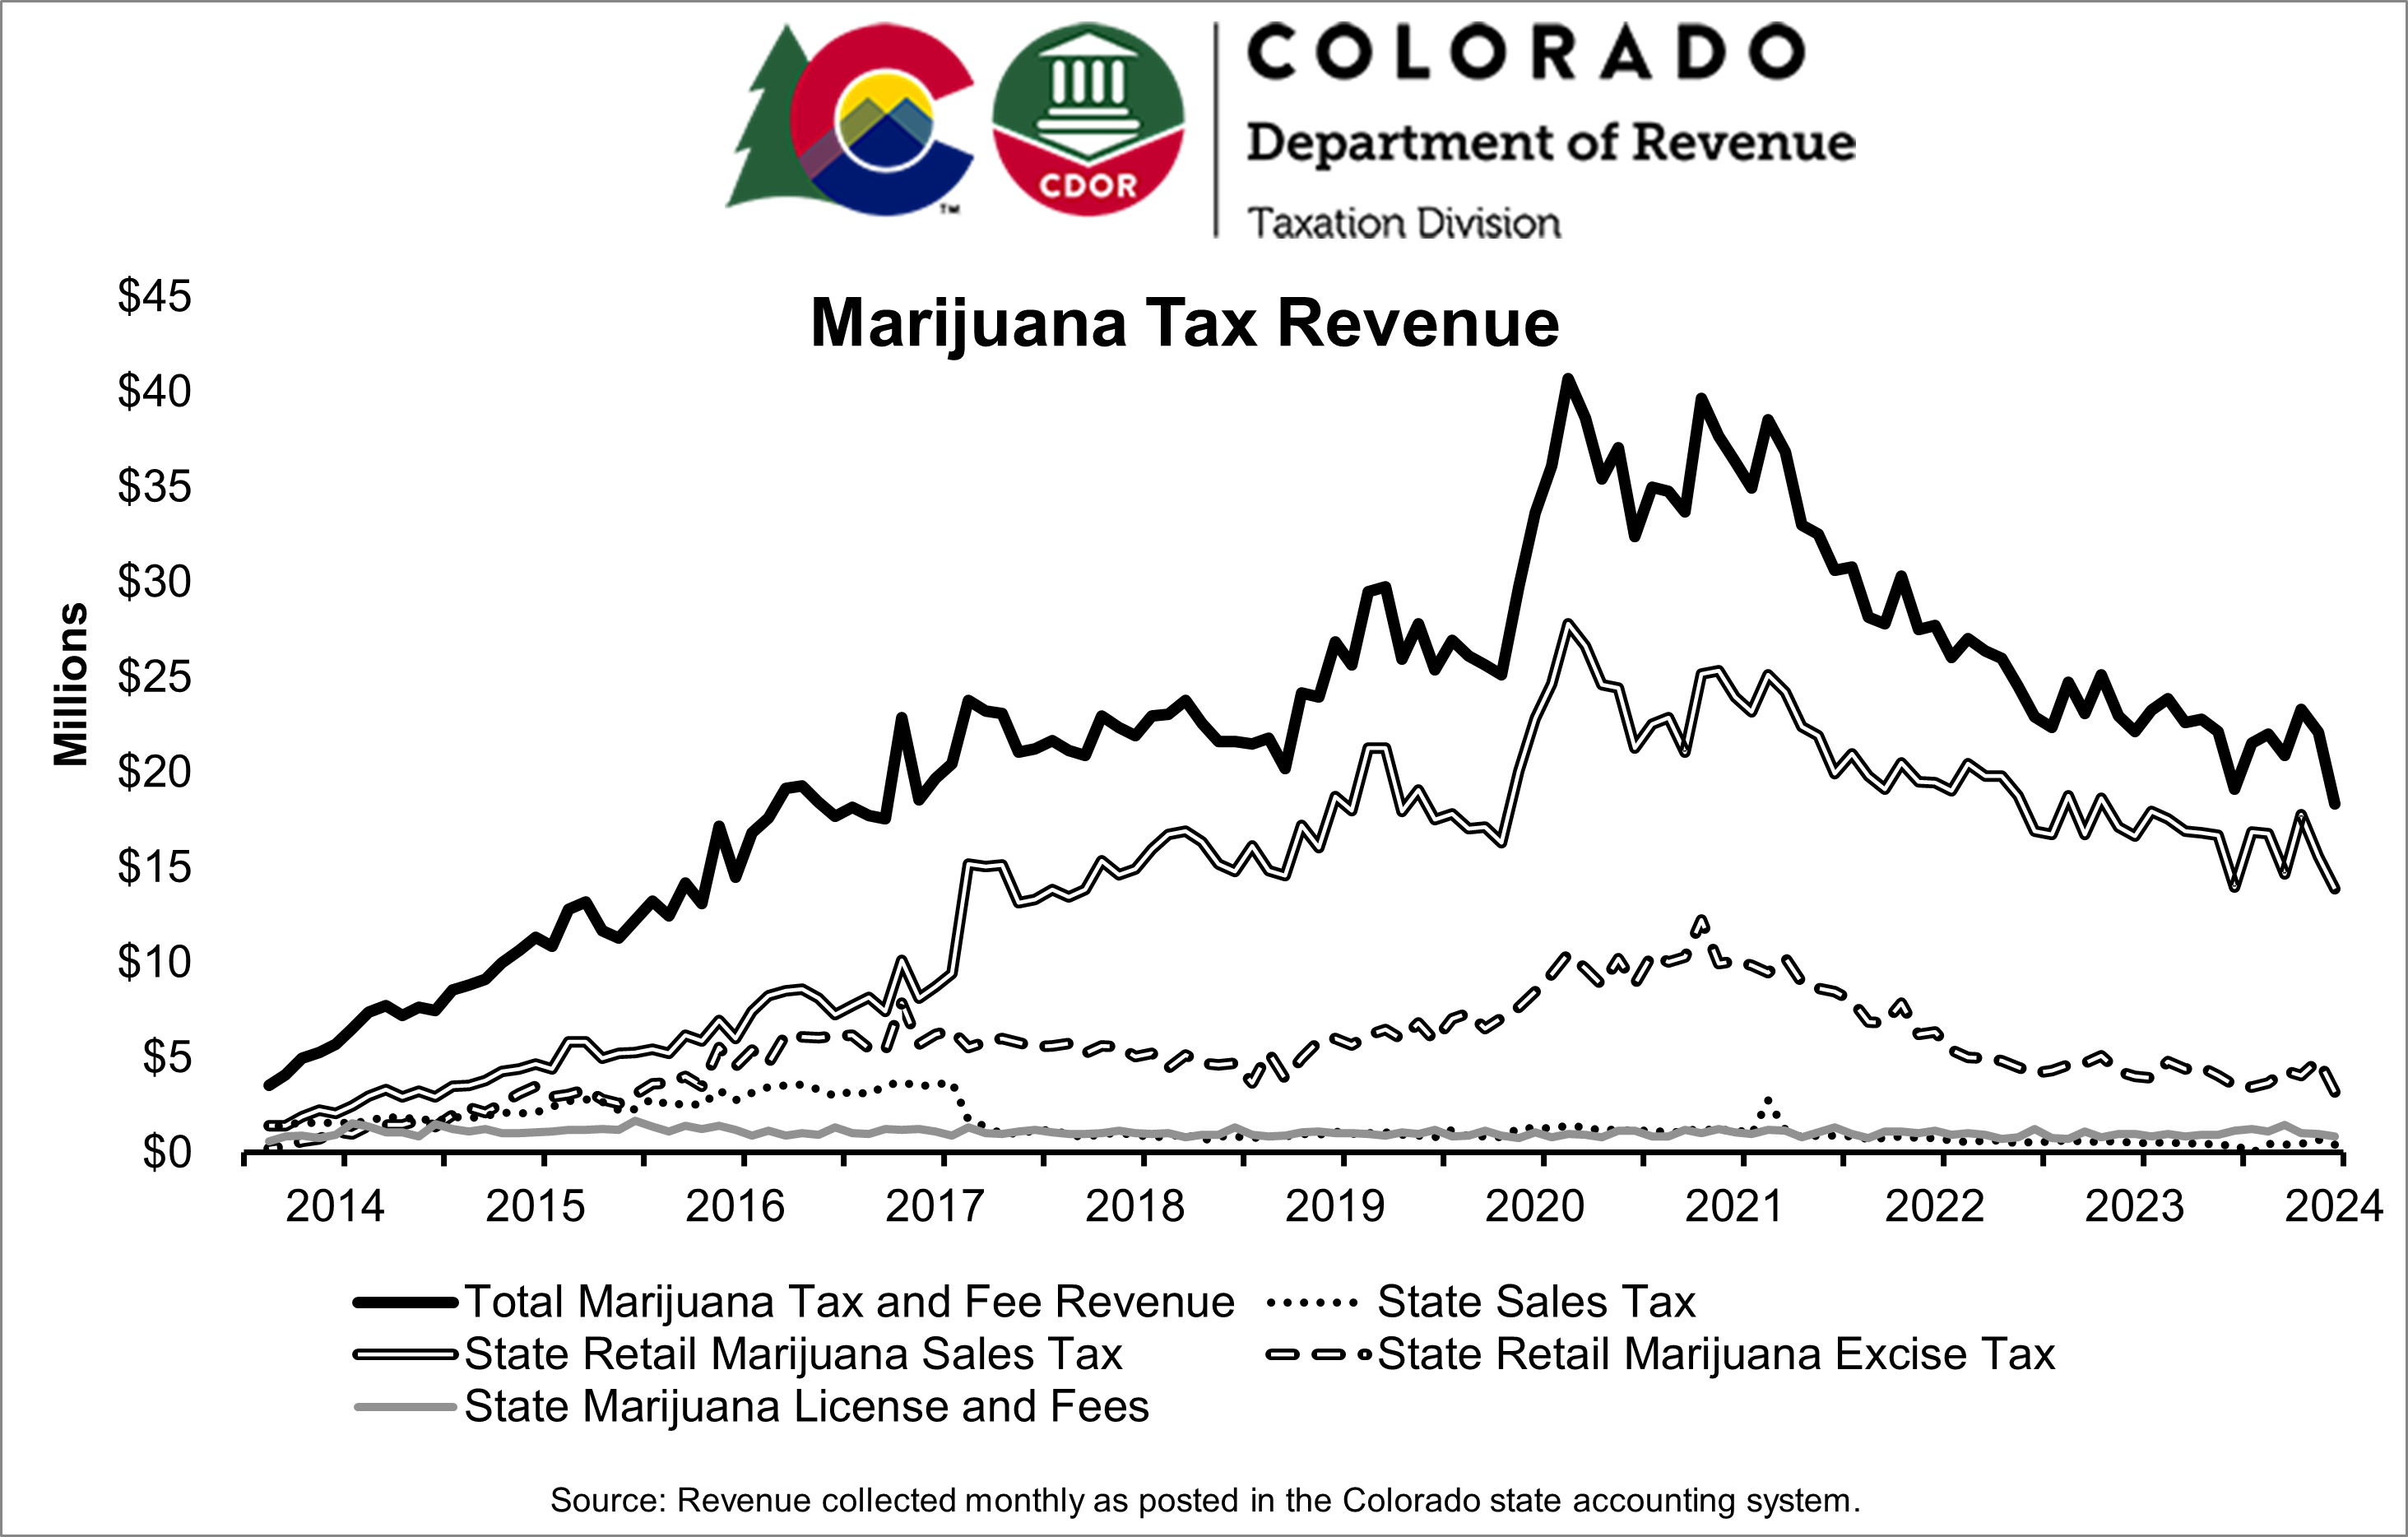 Graph of marijuana tax revenue from 2014 to 2024 with revenue peaking during 2020